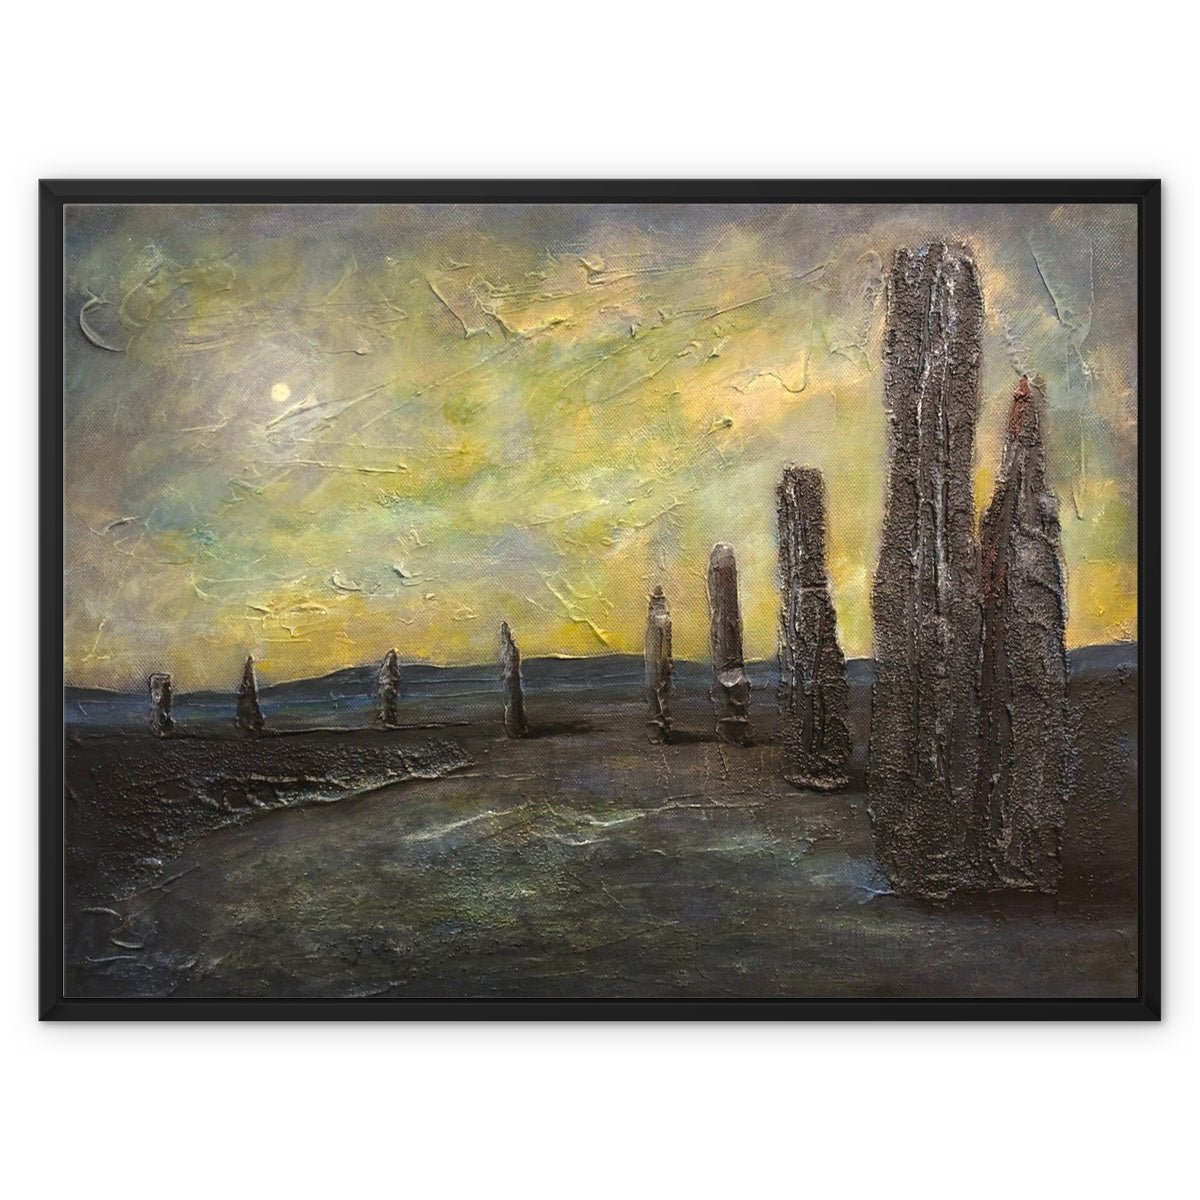 An Ethereal Ring Of Brodgar Orkney Painting | Framed Canvas From Scotland-Floating Framed Canvas Prints-Orkney Art Gallery-32"x24"-Black Frame-Paintings, Prints, Homeware, Art Gifts From Scotland By Scottish Artist Kevin Hunter